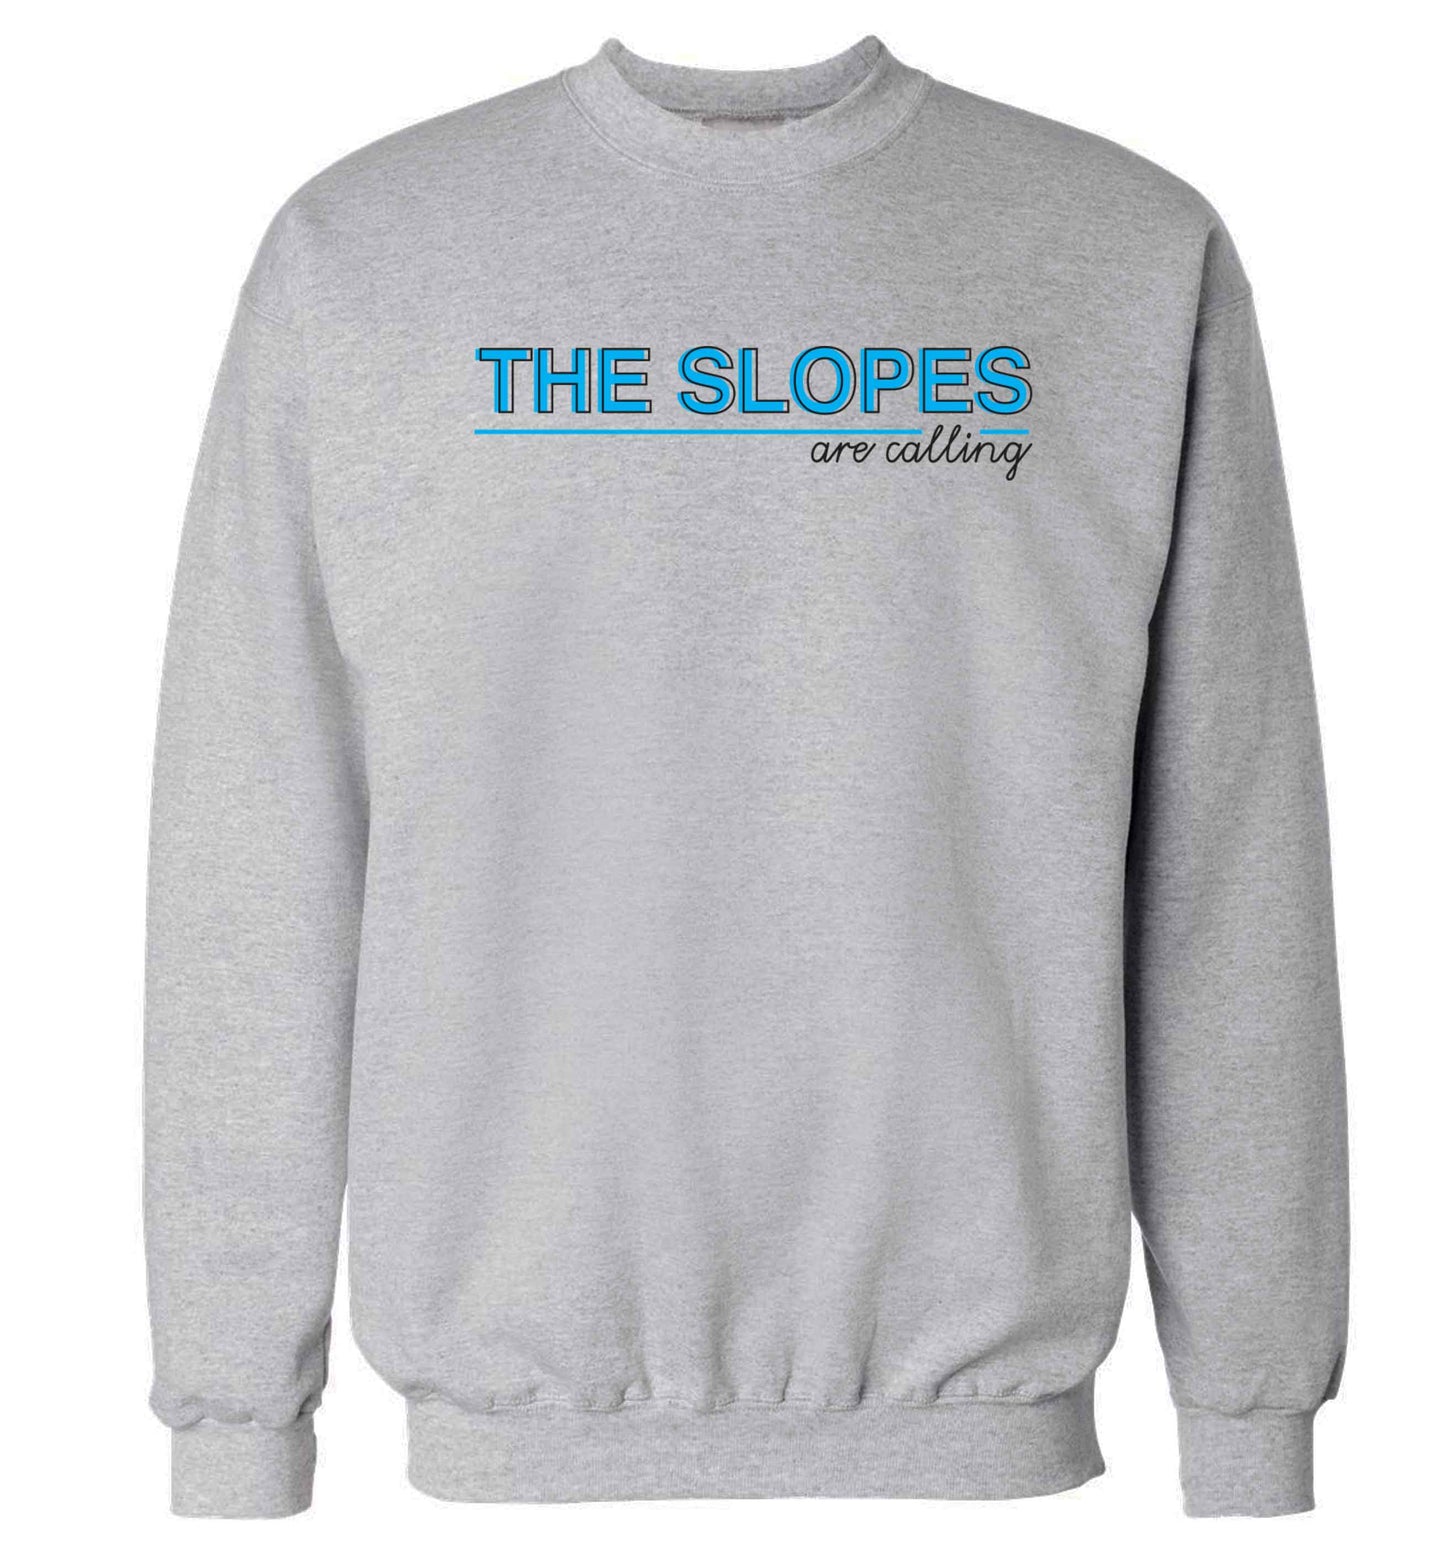 The slopes are calling Adult's unisex grey Sweater 2XL